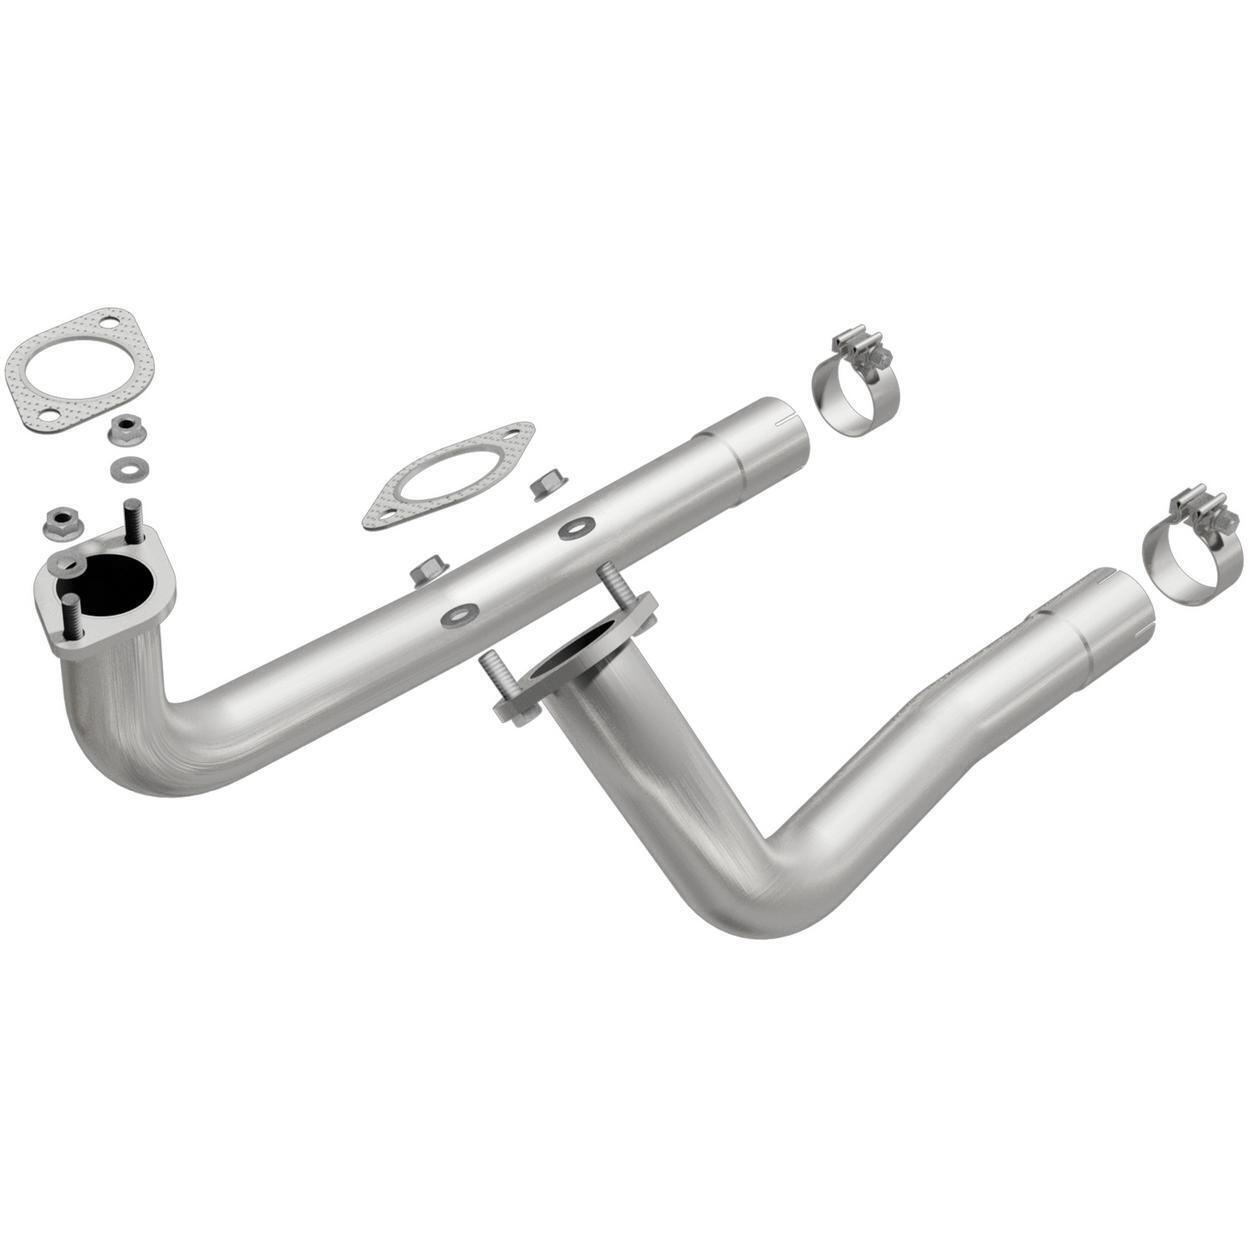 Exhaust and Tail Pipes for 1975-1978 Chrysler Cordoba 6.6L V8 GAS OHV